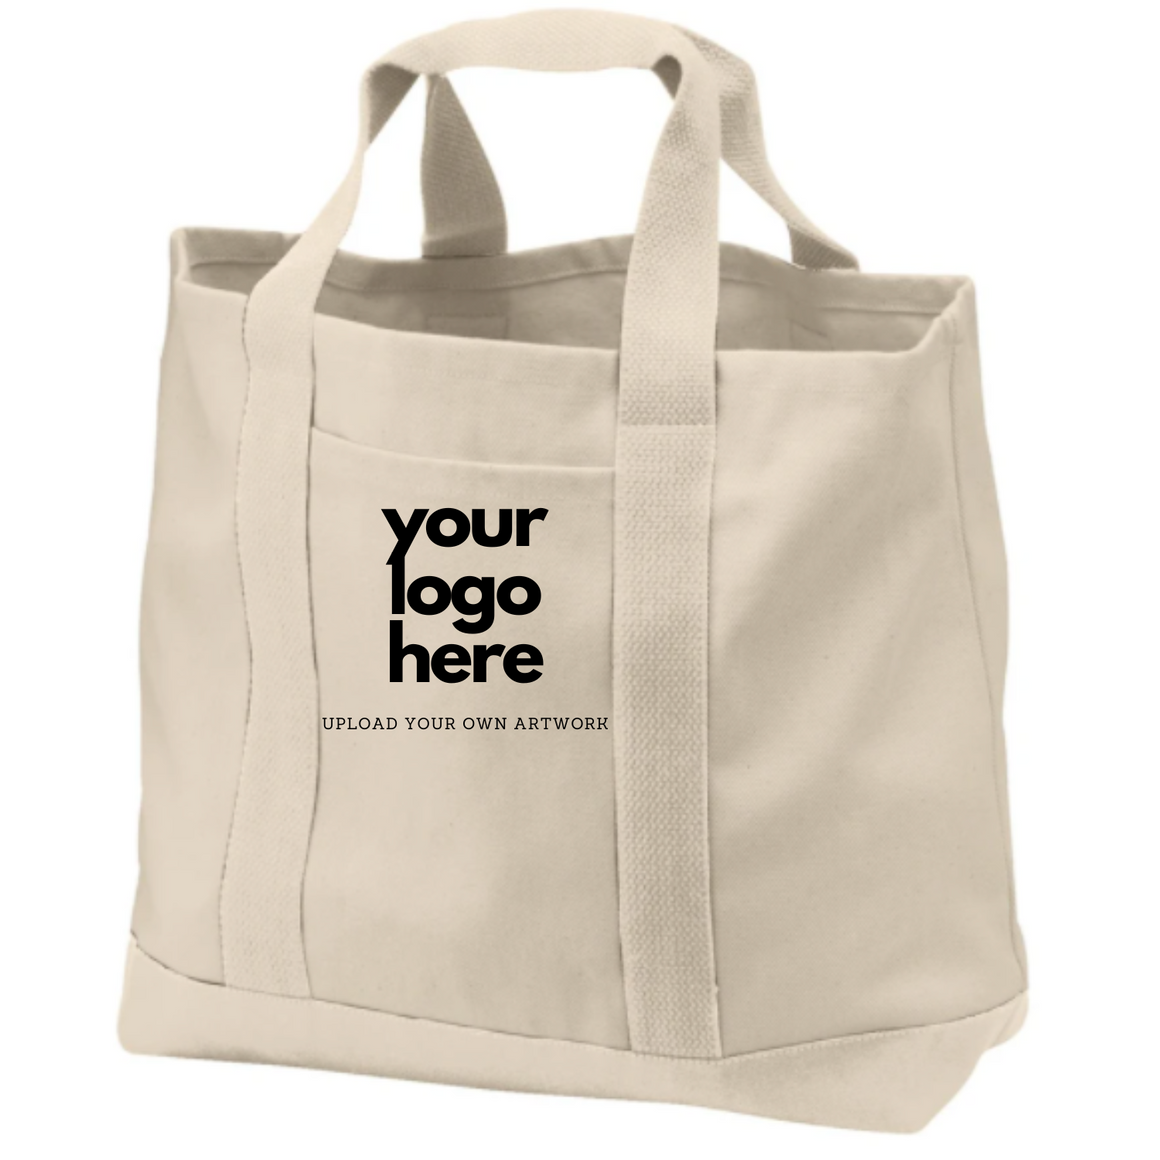 Canvas Tote Bags, Full Color Logo, Design Your Own! $45.00